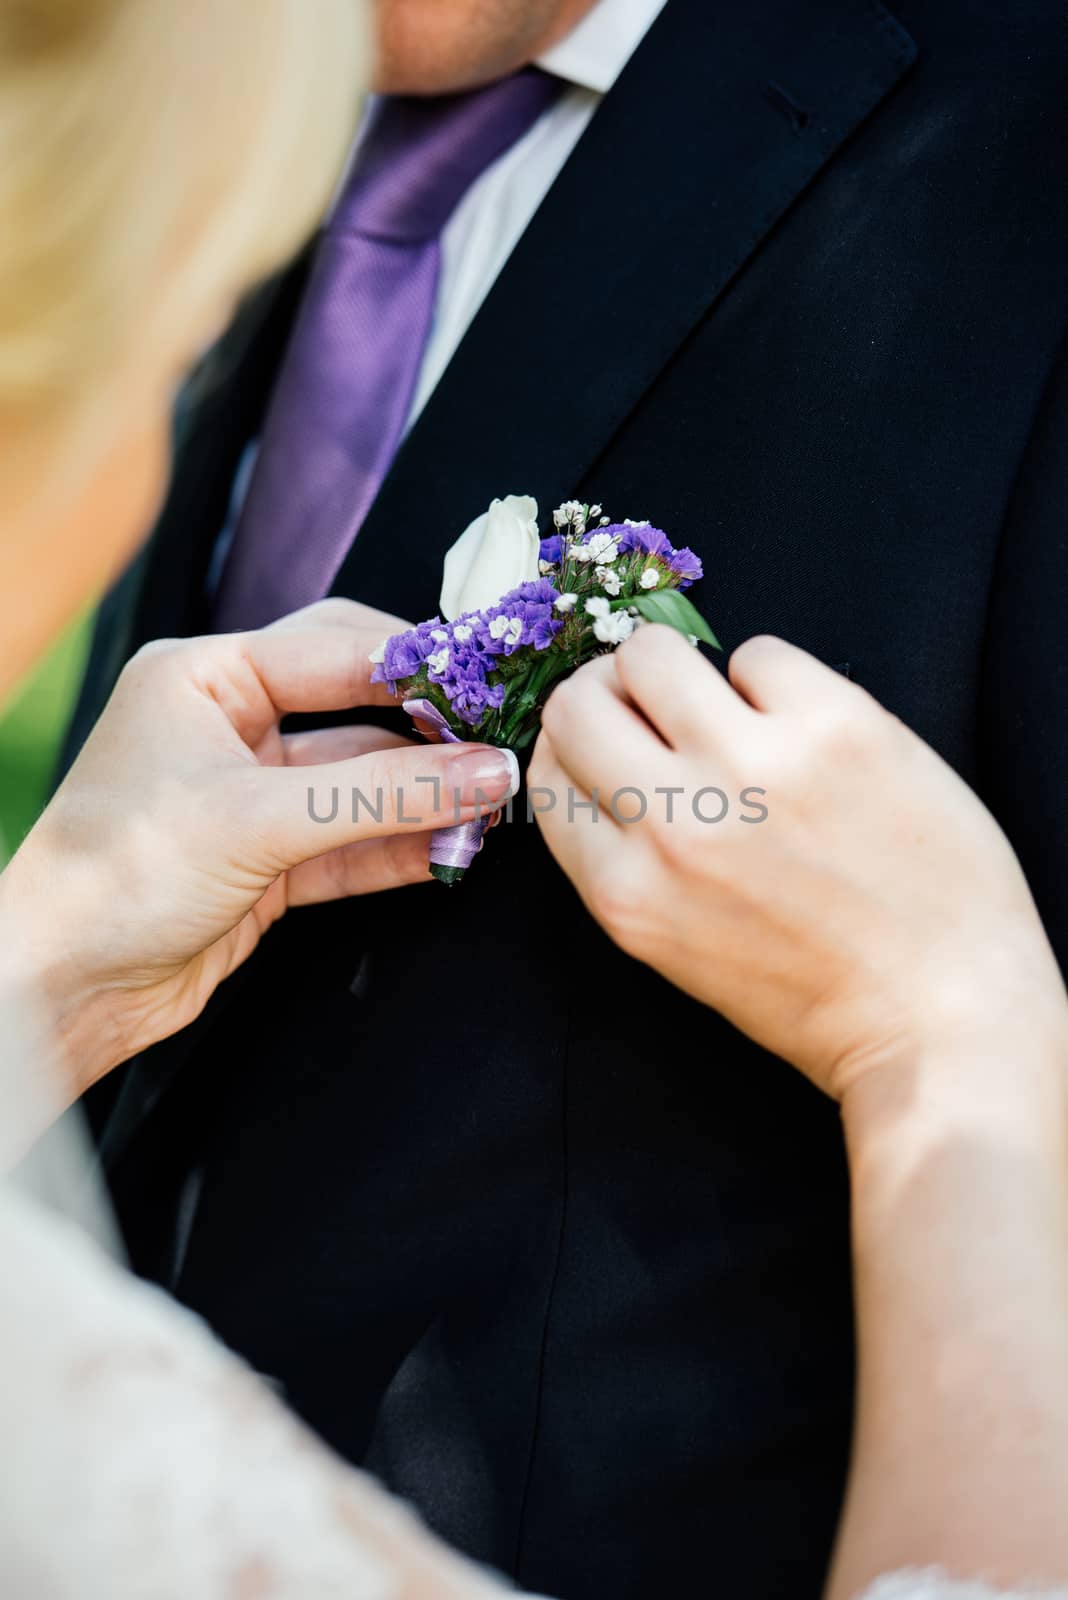 Woman inserting the boutonniere in buttonhole of man in suit by d_duda